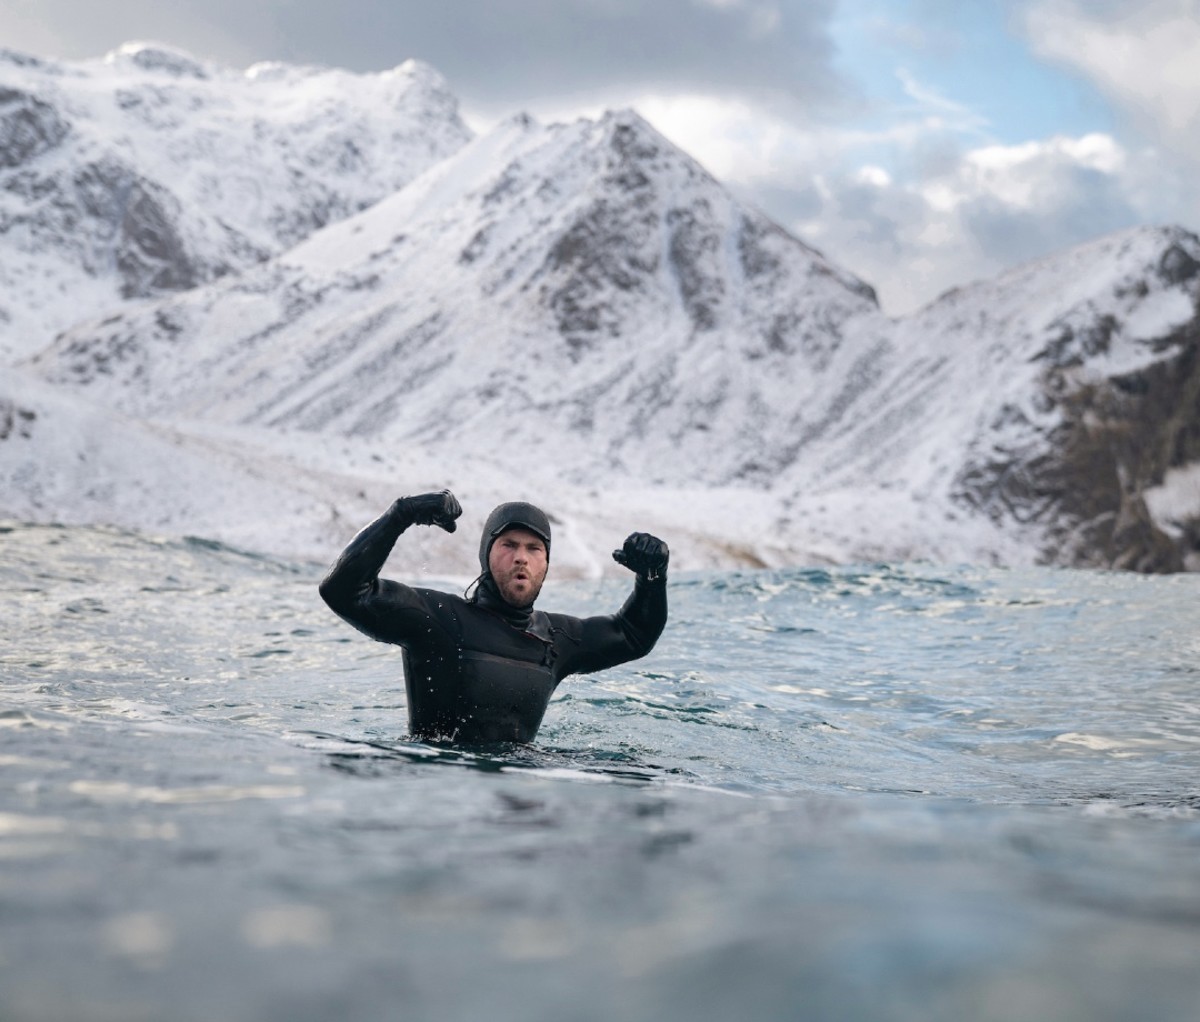 Man celebrating with arms in air while winter surfing in wetsuit